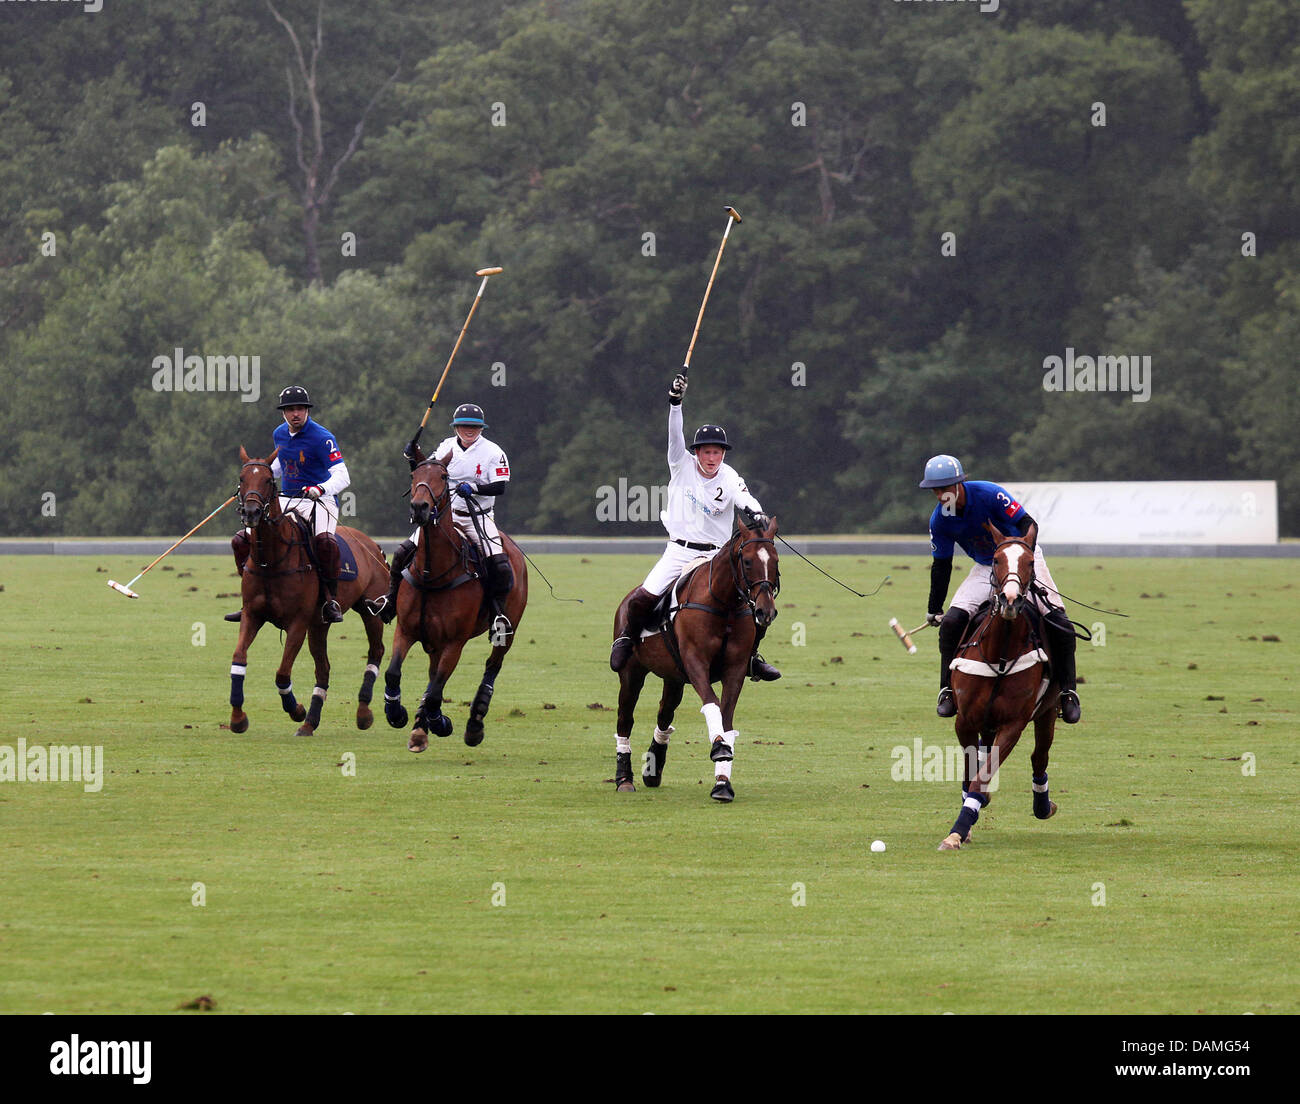 Britain's Prince Harry (2nd to R) plays during the Sentebale Polo Cup at the Coworth Polo Club in Berkshire, Britain, 12 June 2011. Prince Harry played for the Sentebale team. Photo: Albert Nieboer NETHERLANDS OUT Stock Photo